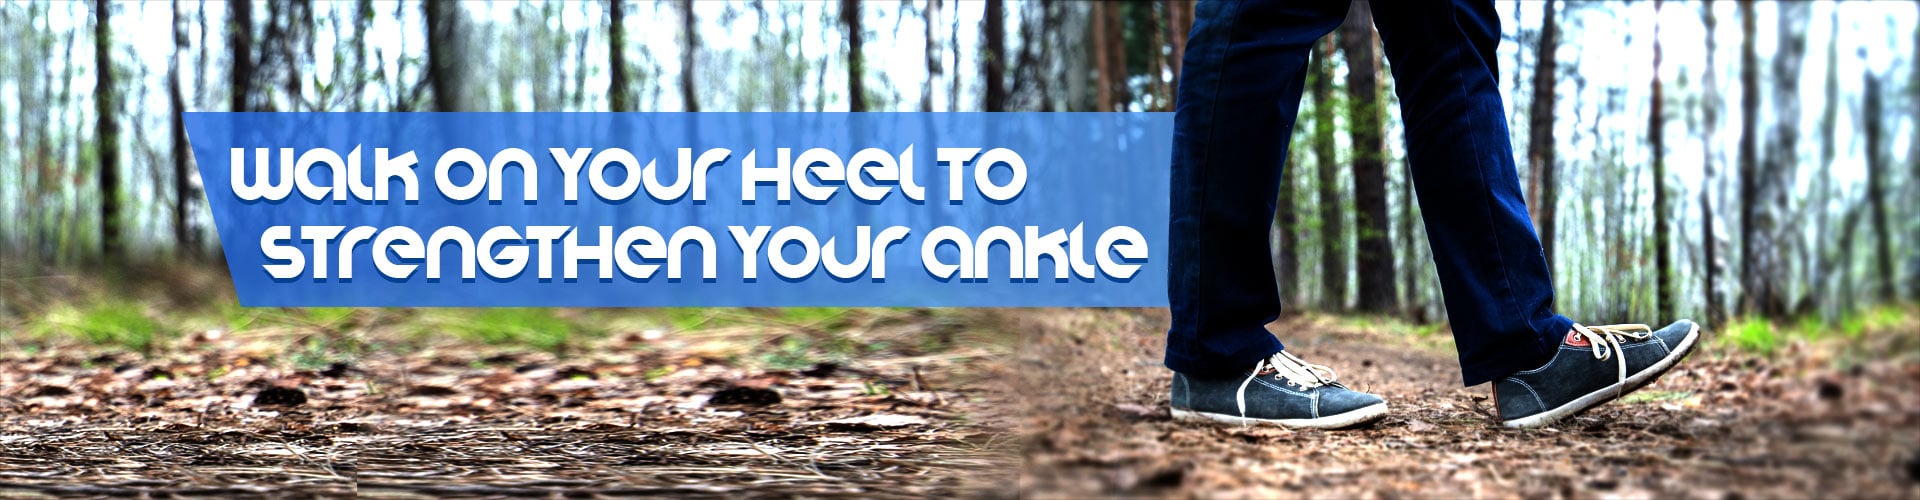 Walk On Your Heel To Strengthen Your Ankle